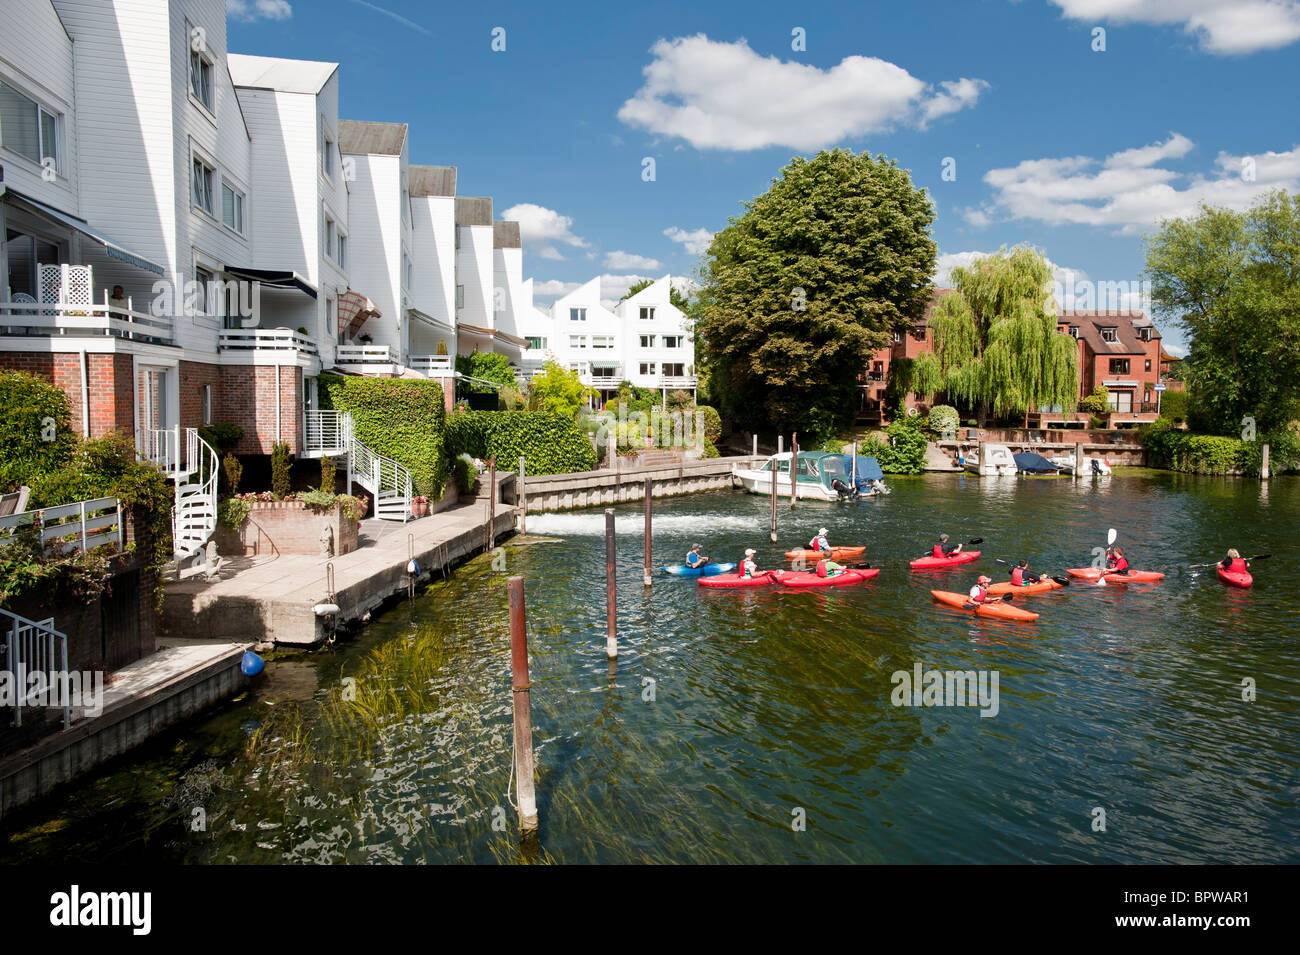 Summer activities and passing through Marlow Lock on the River Thames, Buckinghamshire, England, United Kingdom Stock Photo